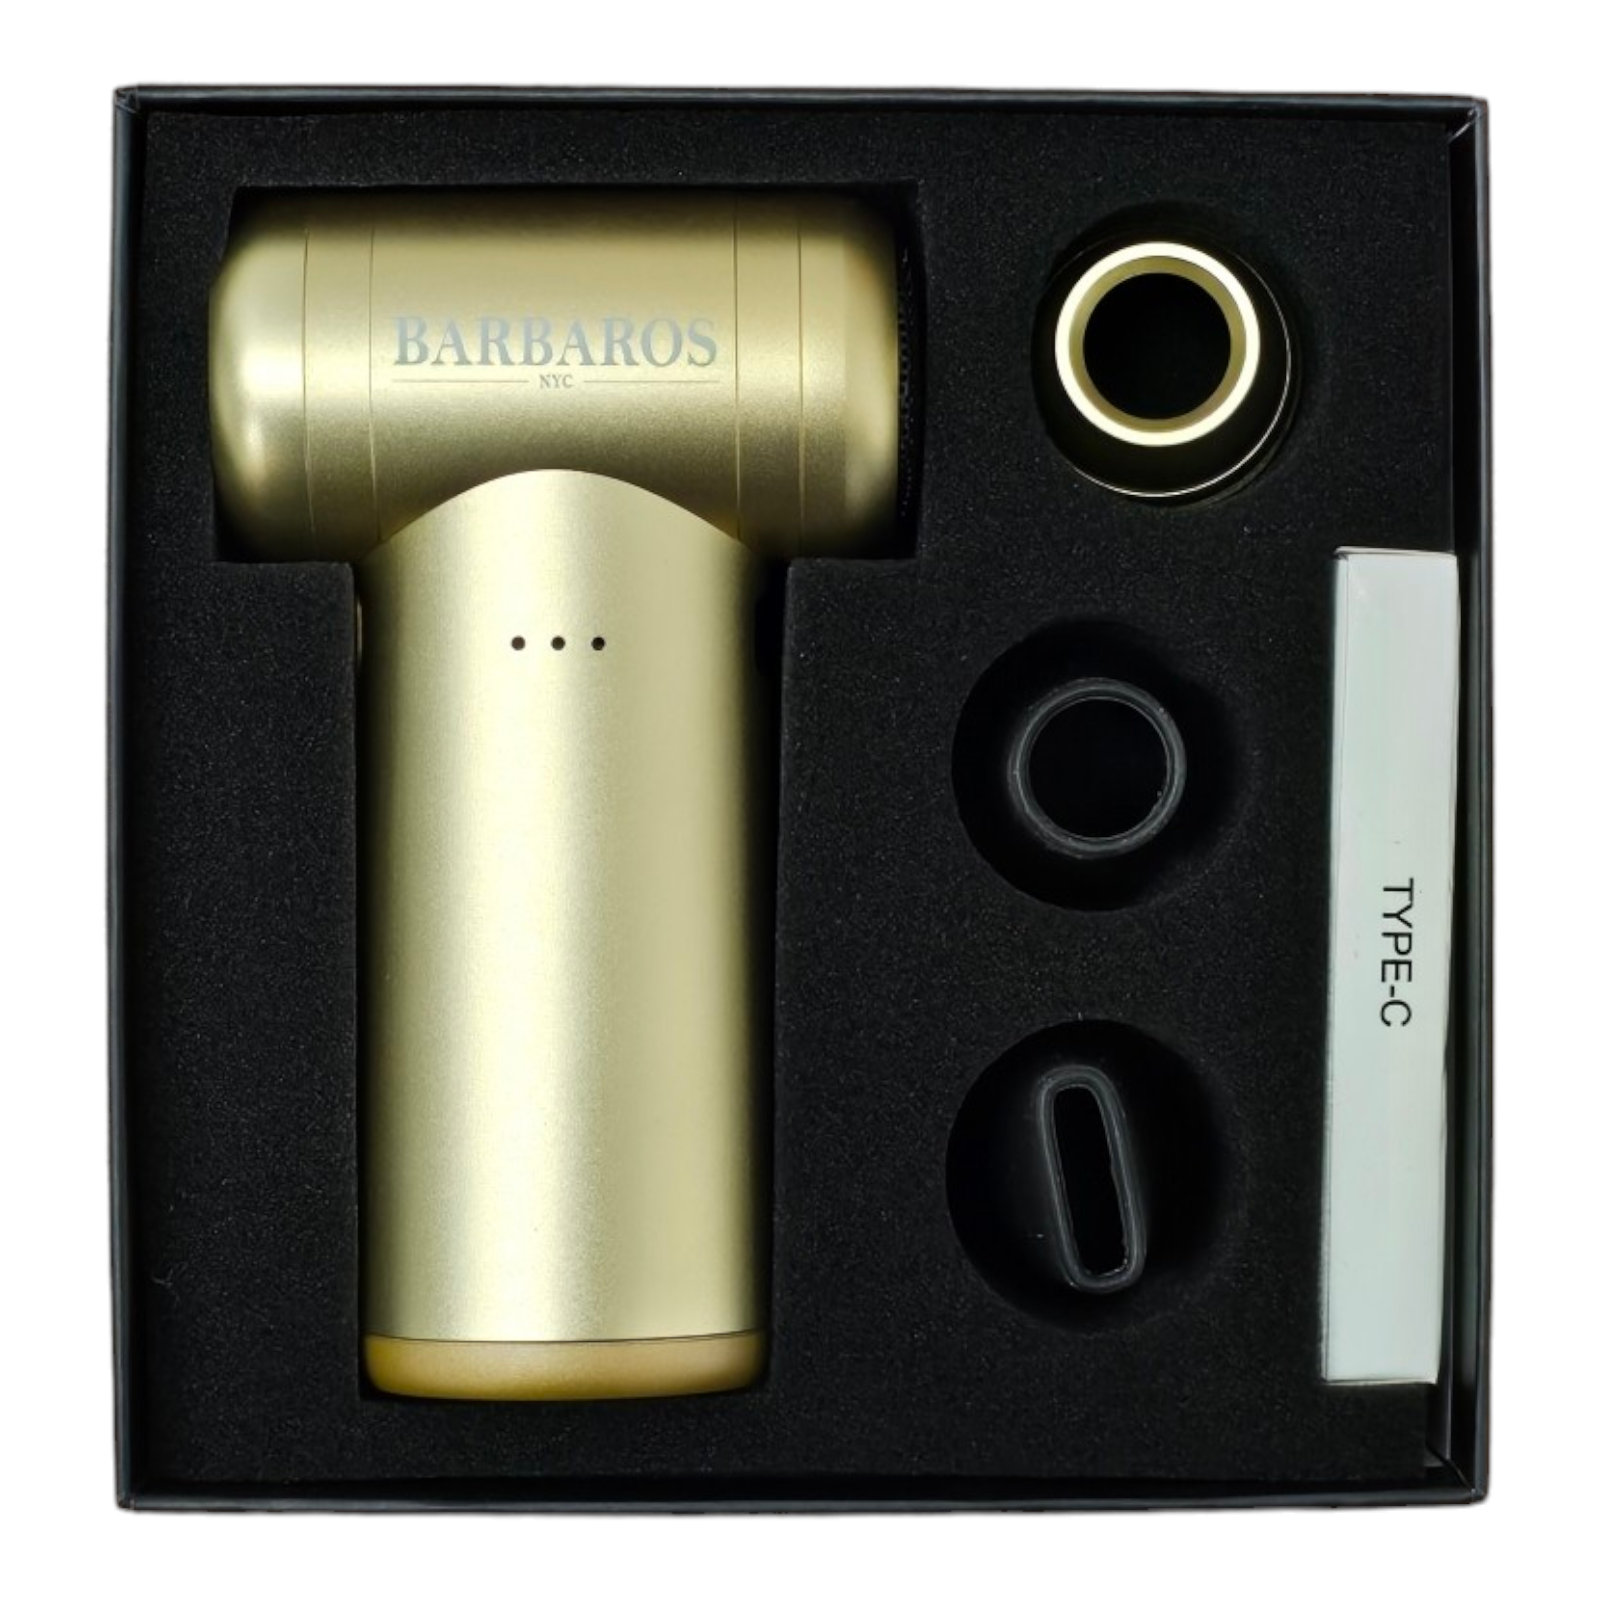 Barbaros 4-in-1 TurboJet Air Duster Pro Gold-Clipper Vault